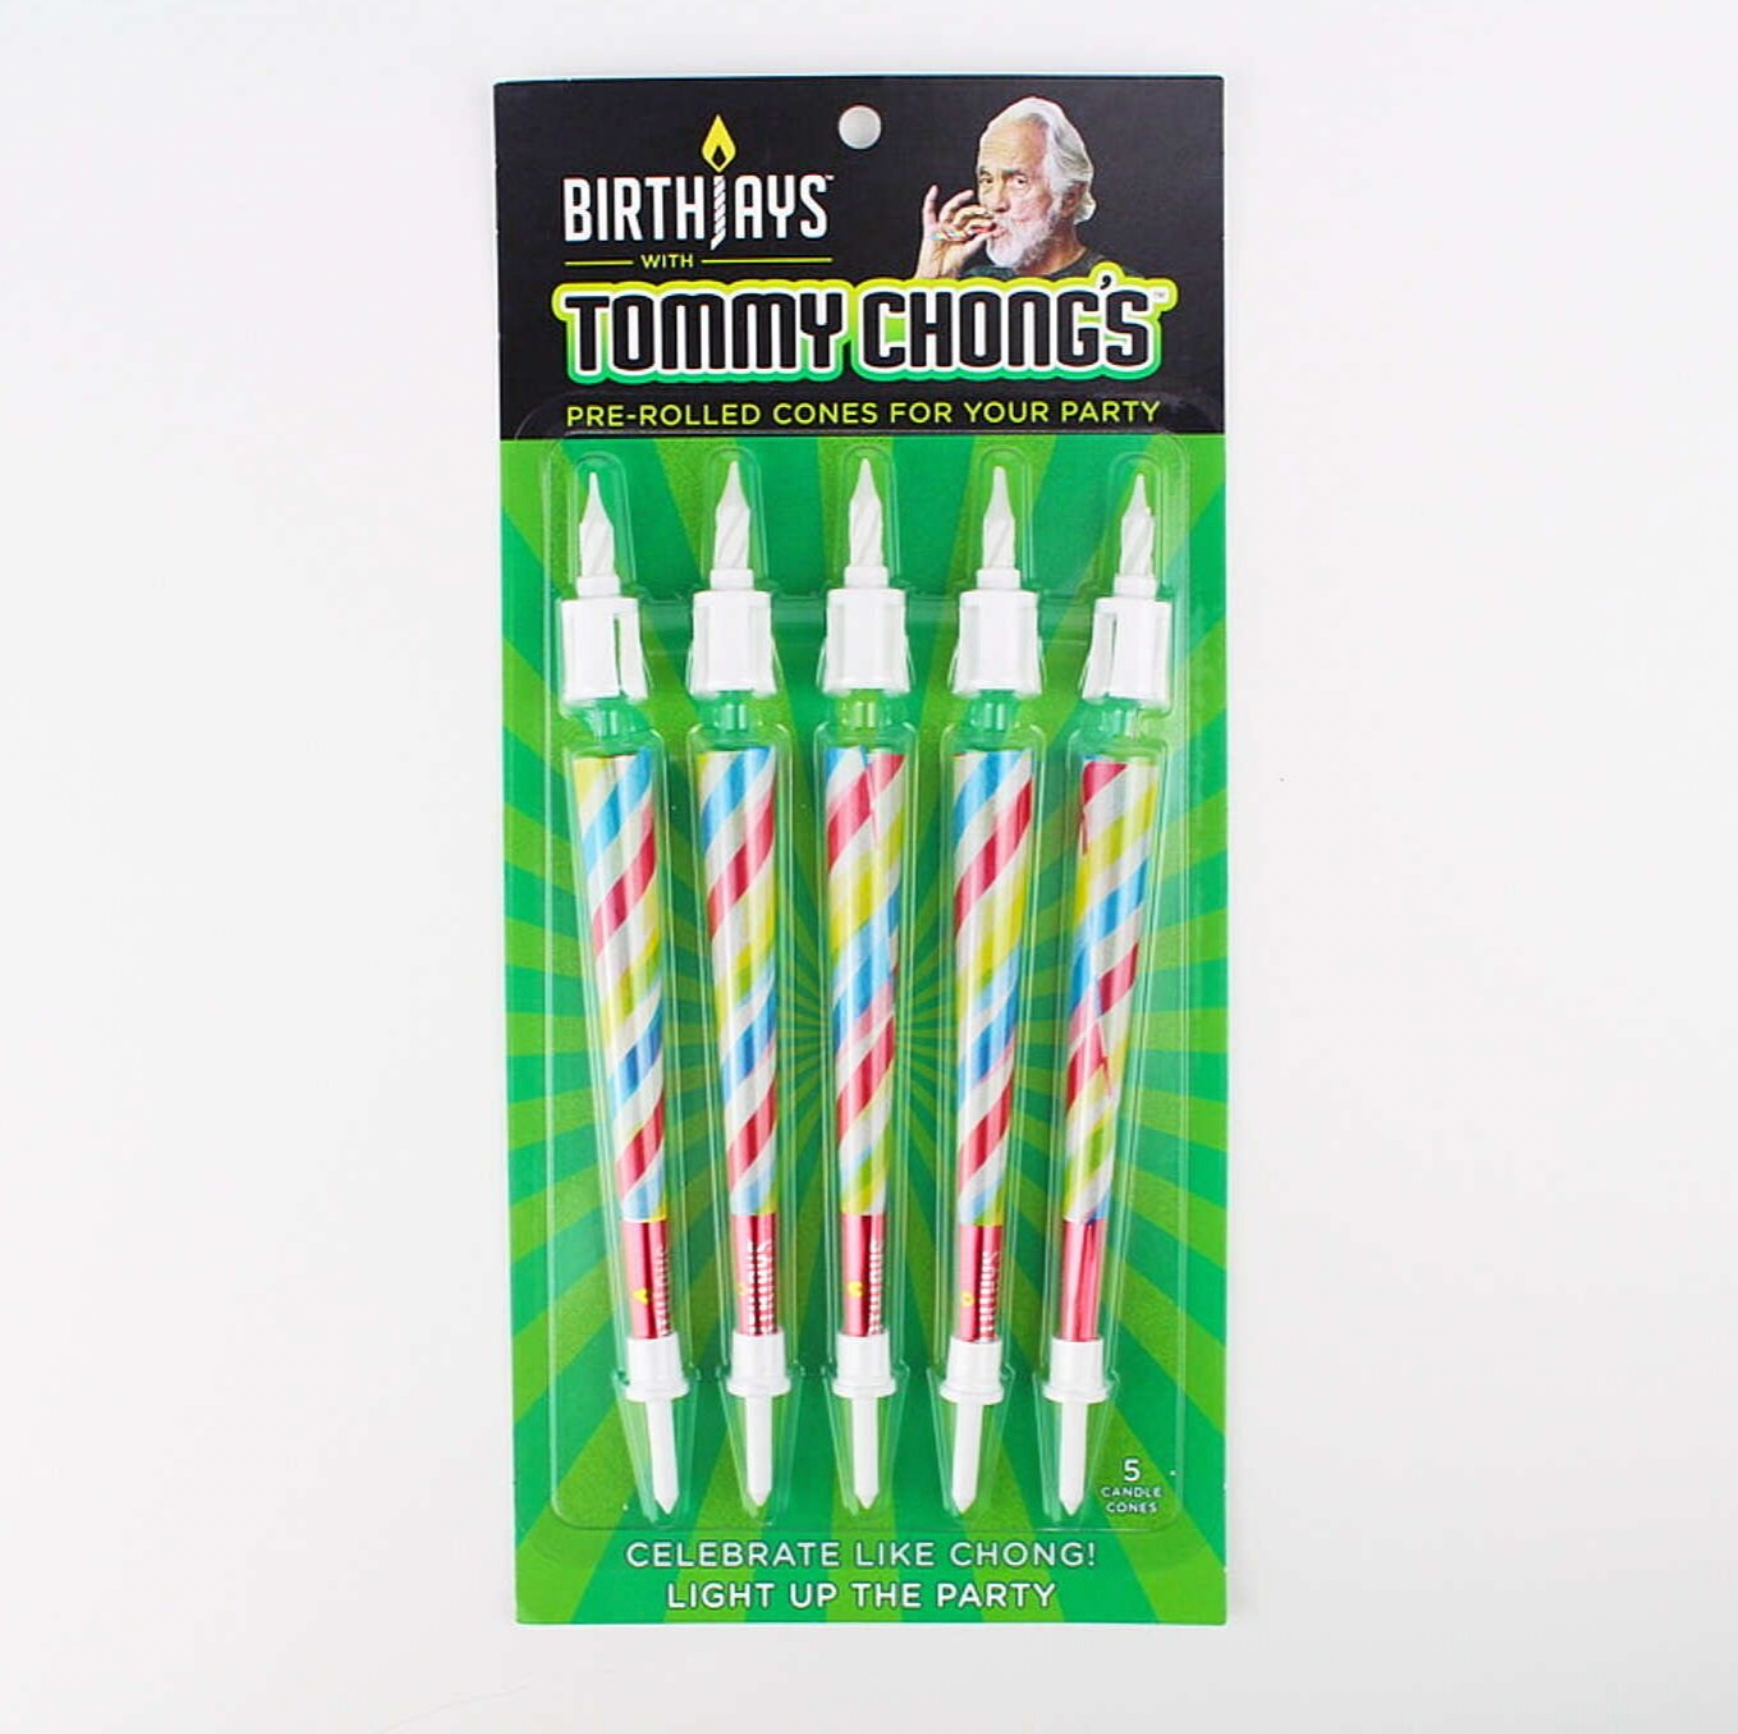 Tommy Chong's BirthJays 5-Pack of Joint Birthday Candles